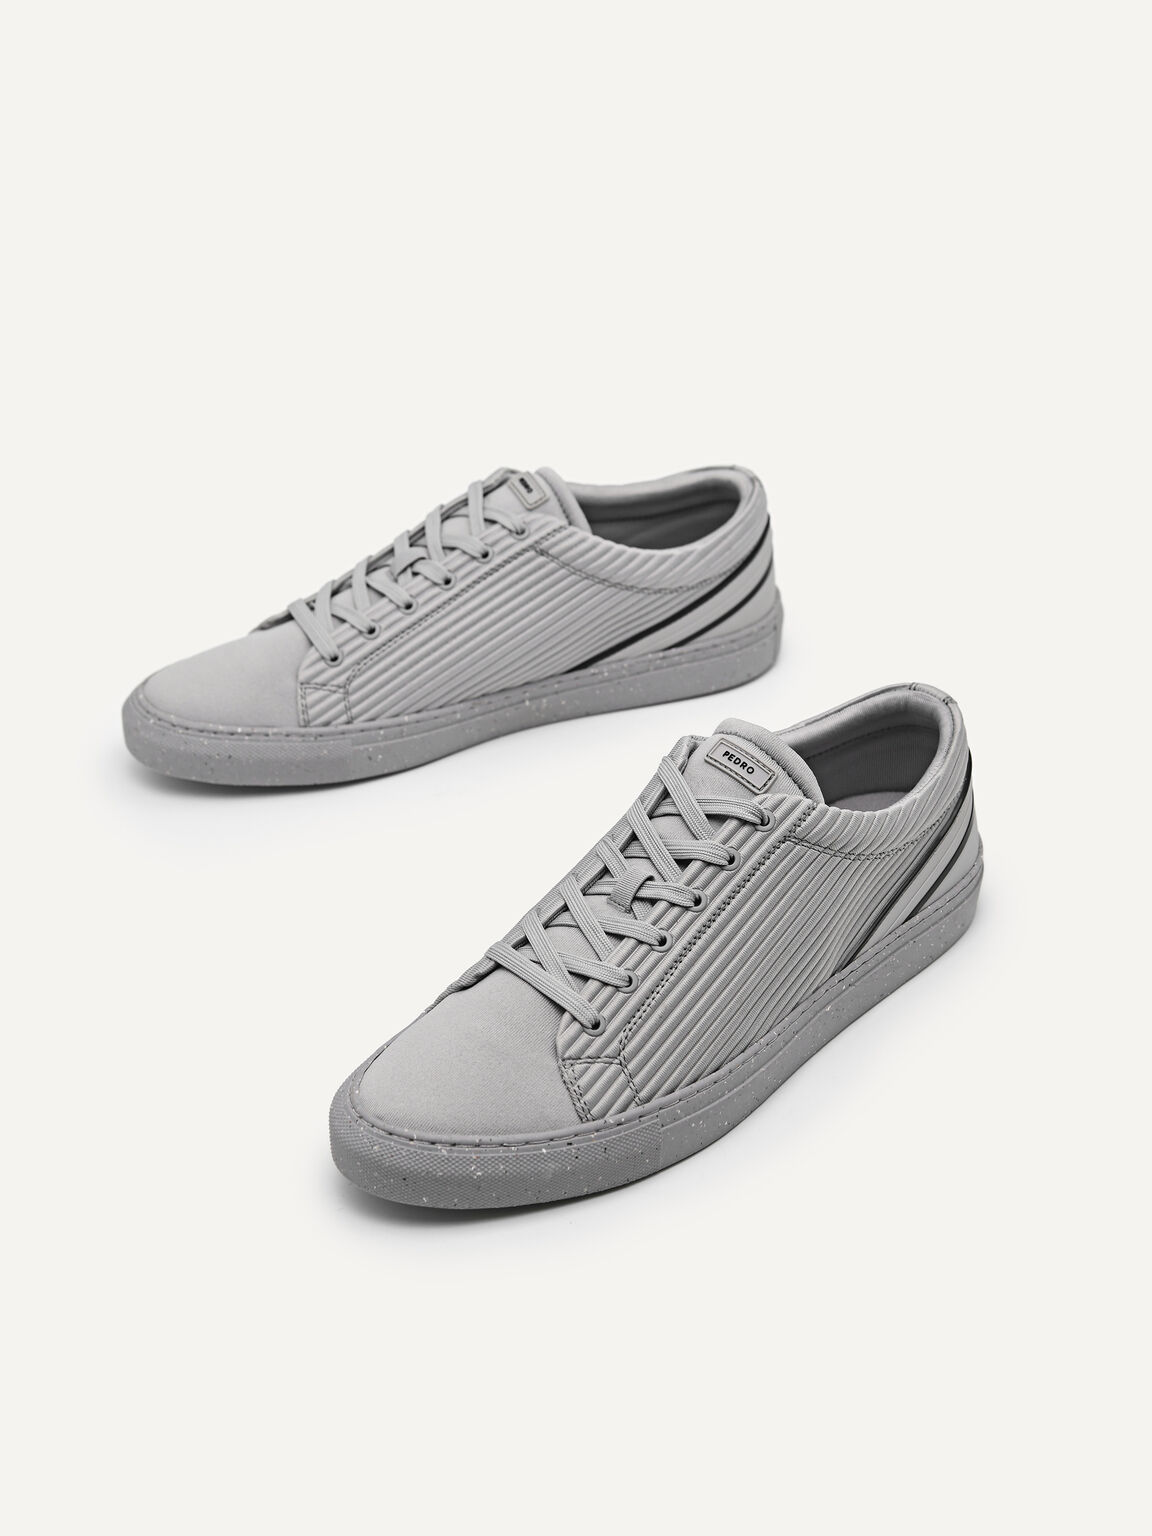 rePEDRO Pleated Sneakers, Grey